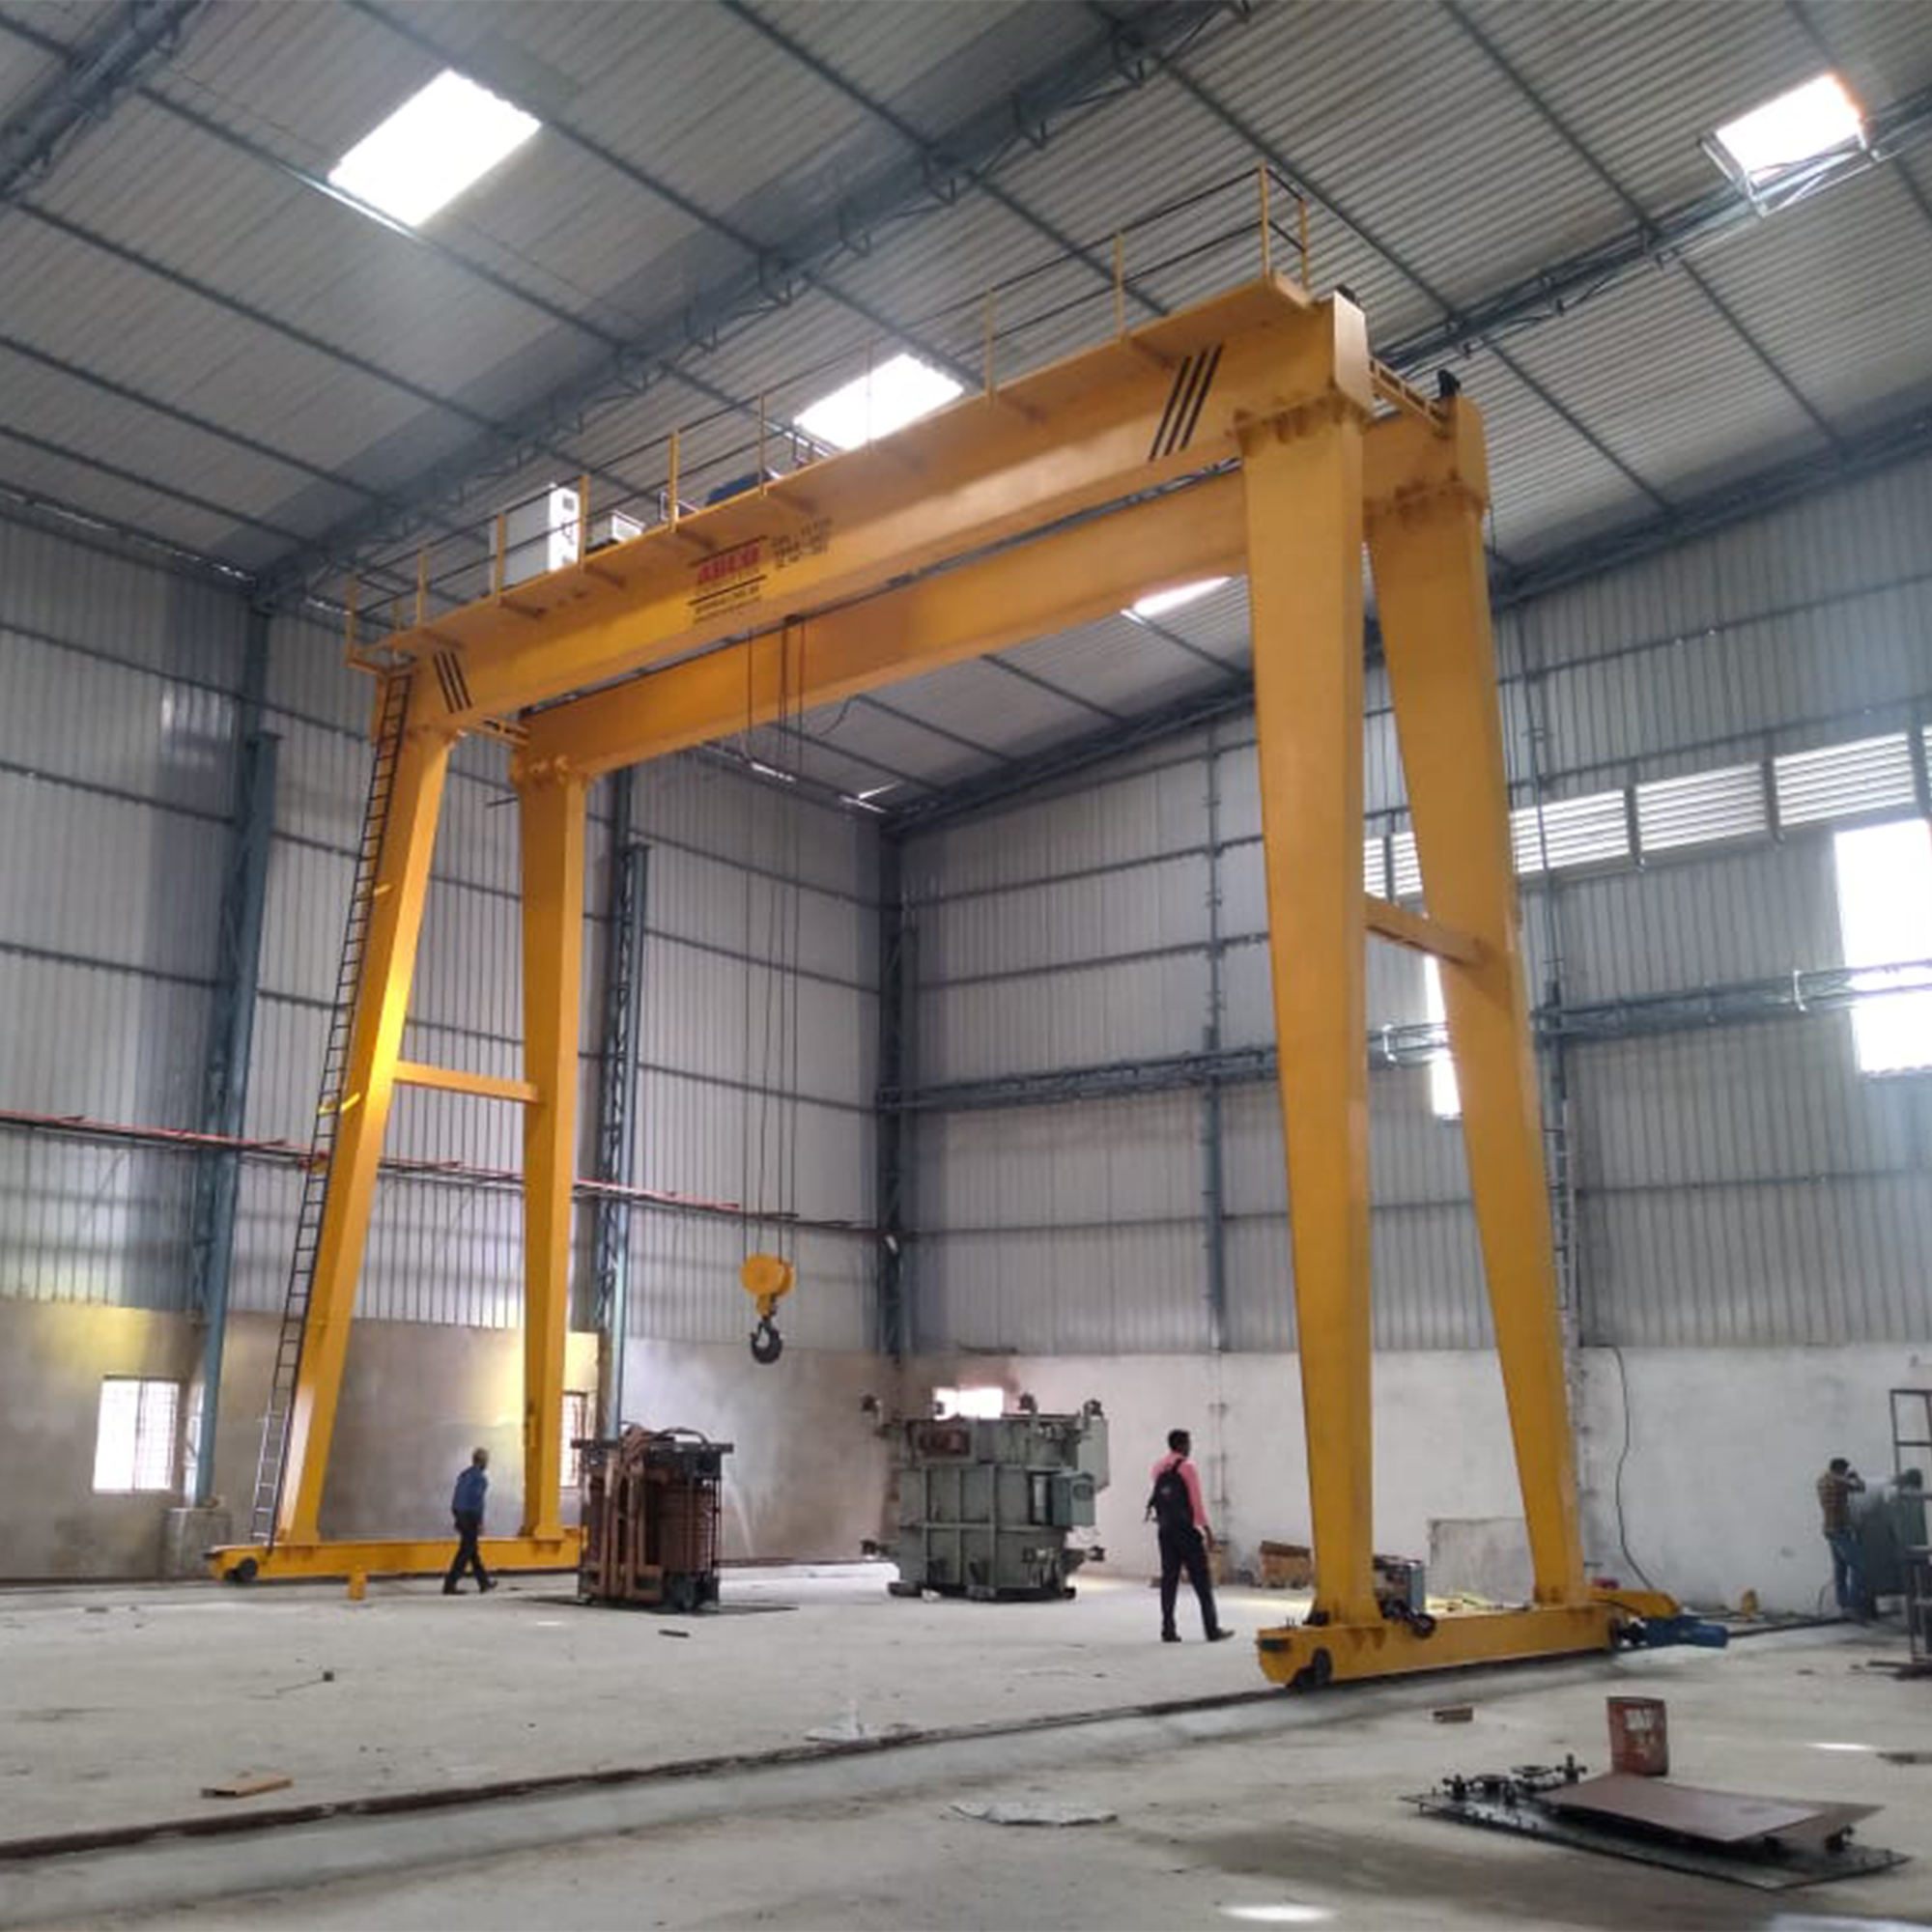 How to safely use lifting equipment on the site